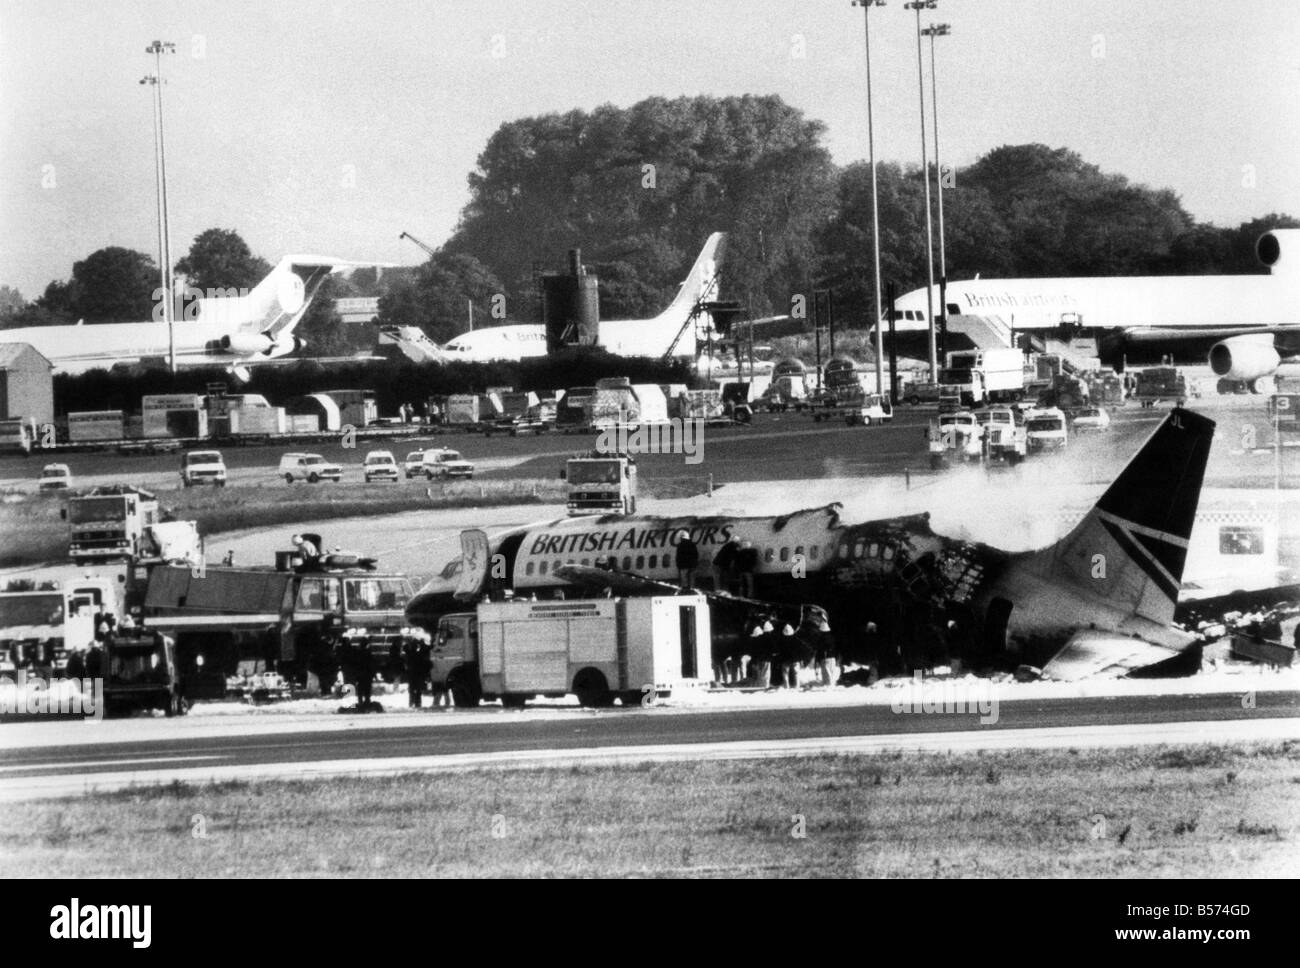 Manchester Holiday Flight Tragedy: Fifty-four passengers died early yesterday morning when an aircraft exploded at Manchester Airport. Eighty-three people escaped with various injuries, although only 79 were taken to hospital and 15 were detained suffering from burns. Two of the crew of six were among the dead, who have yet to be named. In all 137 passengers were aboard the Boeing 737 as it approached take-off at 100mph. August 1985 P004418 Stock Photo